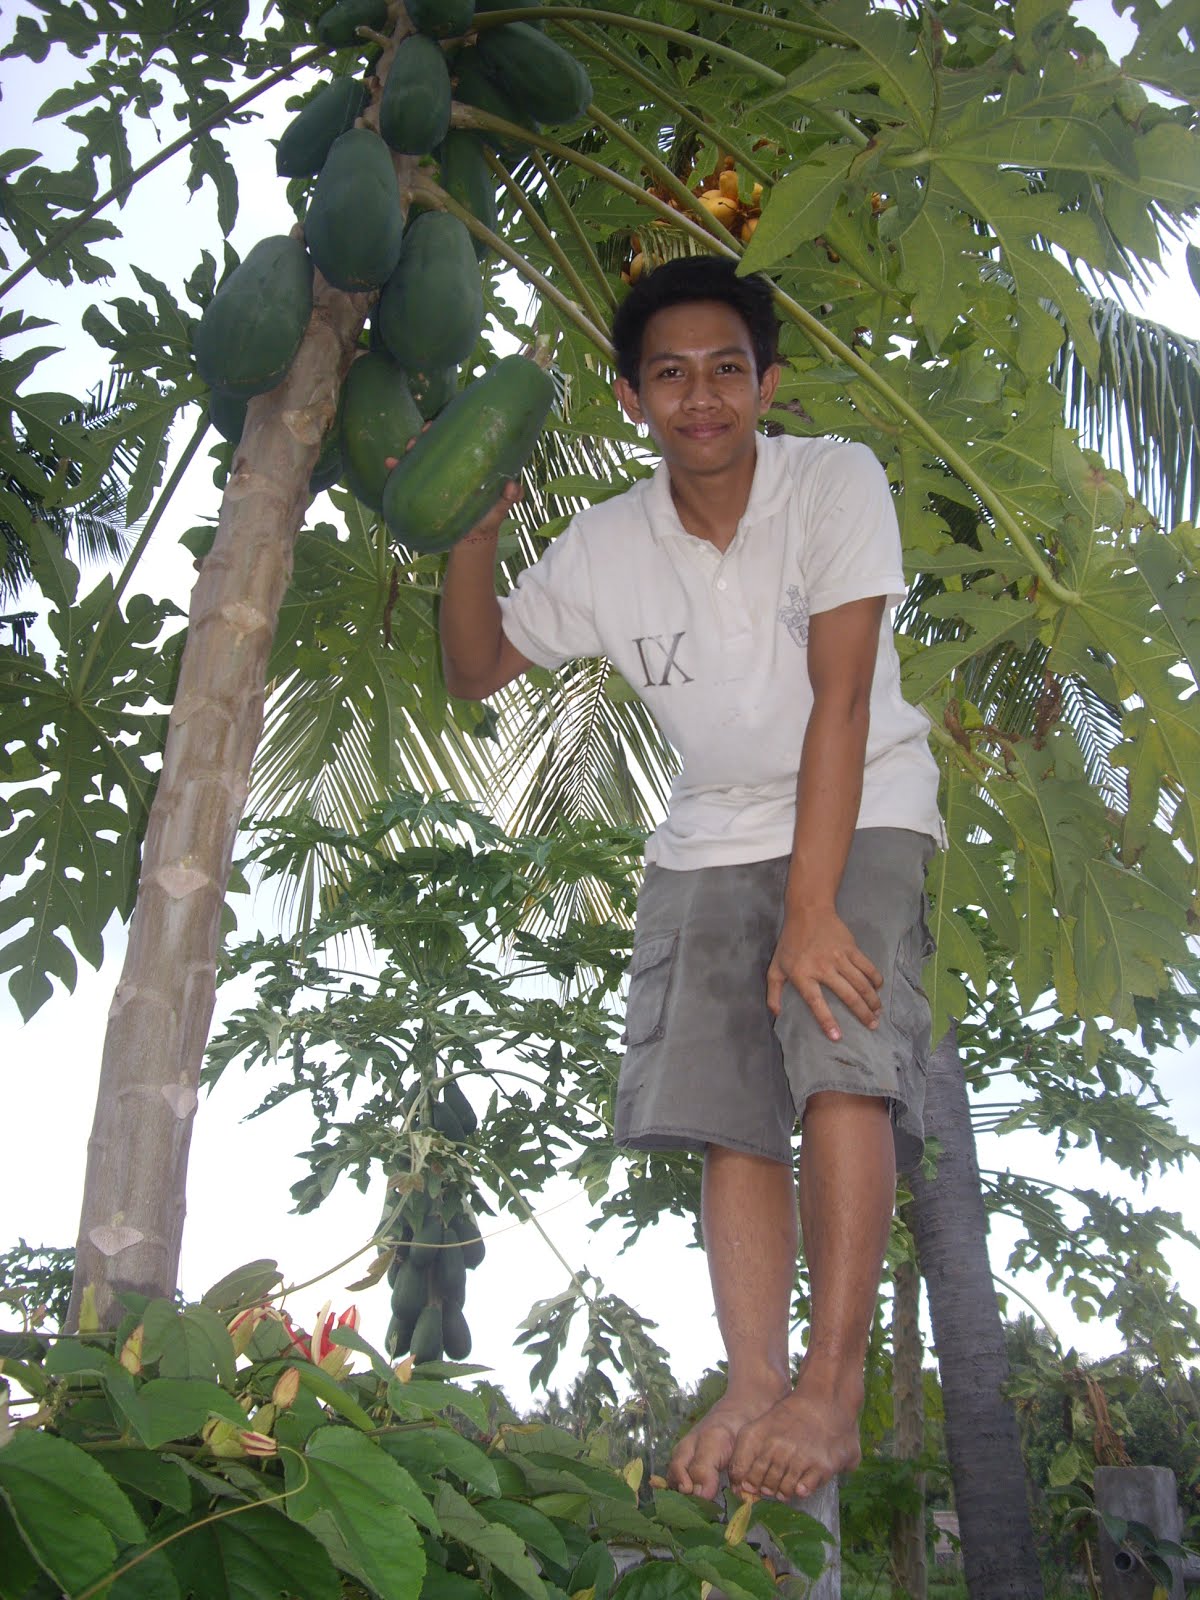 BOY COLLECTING PAPAYA FRUIT FROM A LOCAL TREE IN THE GARDEN OF EDEN KNOWN AS BALI